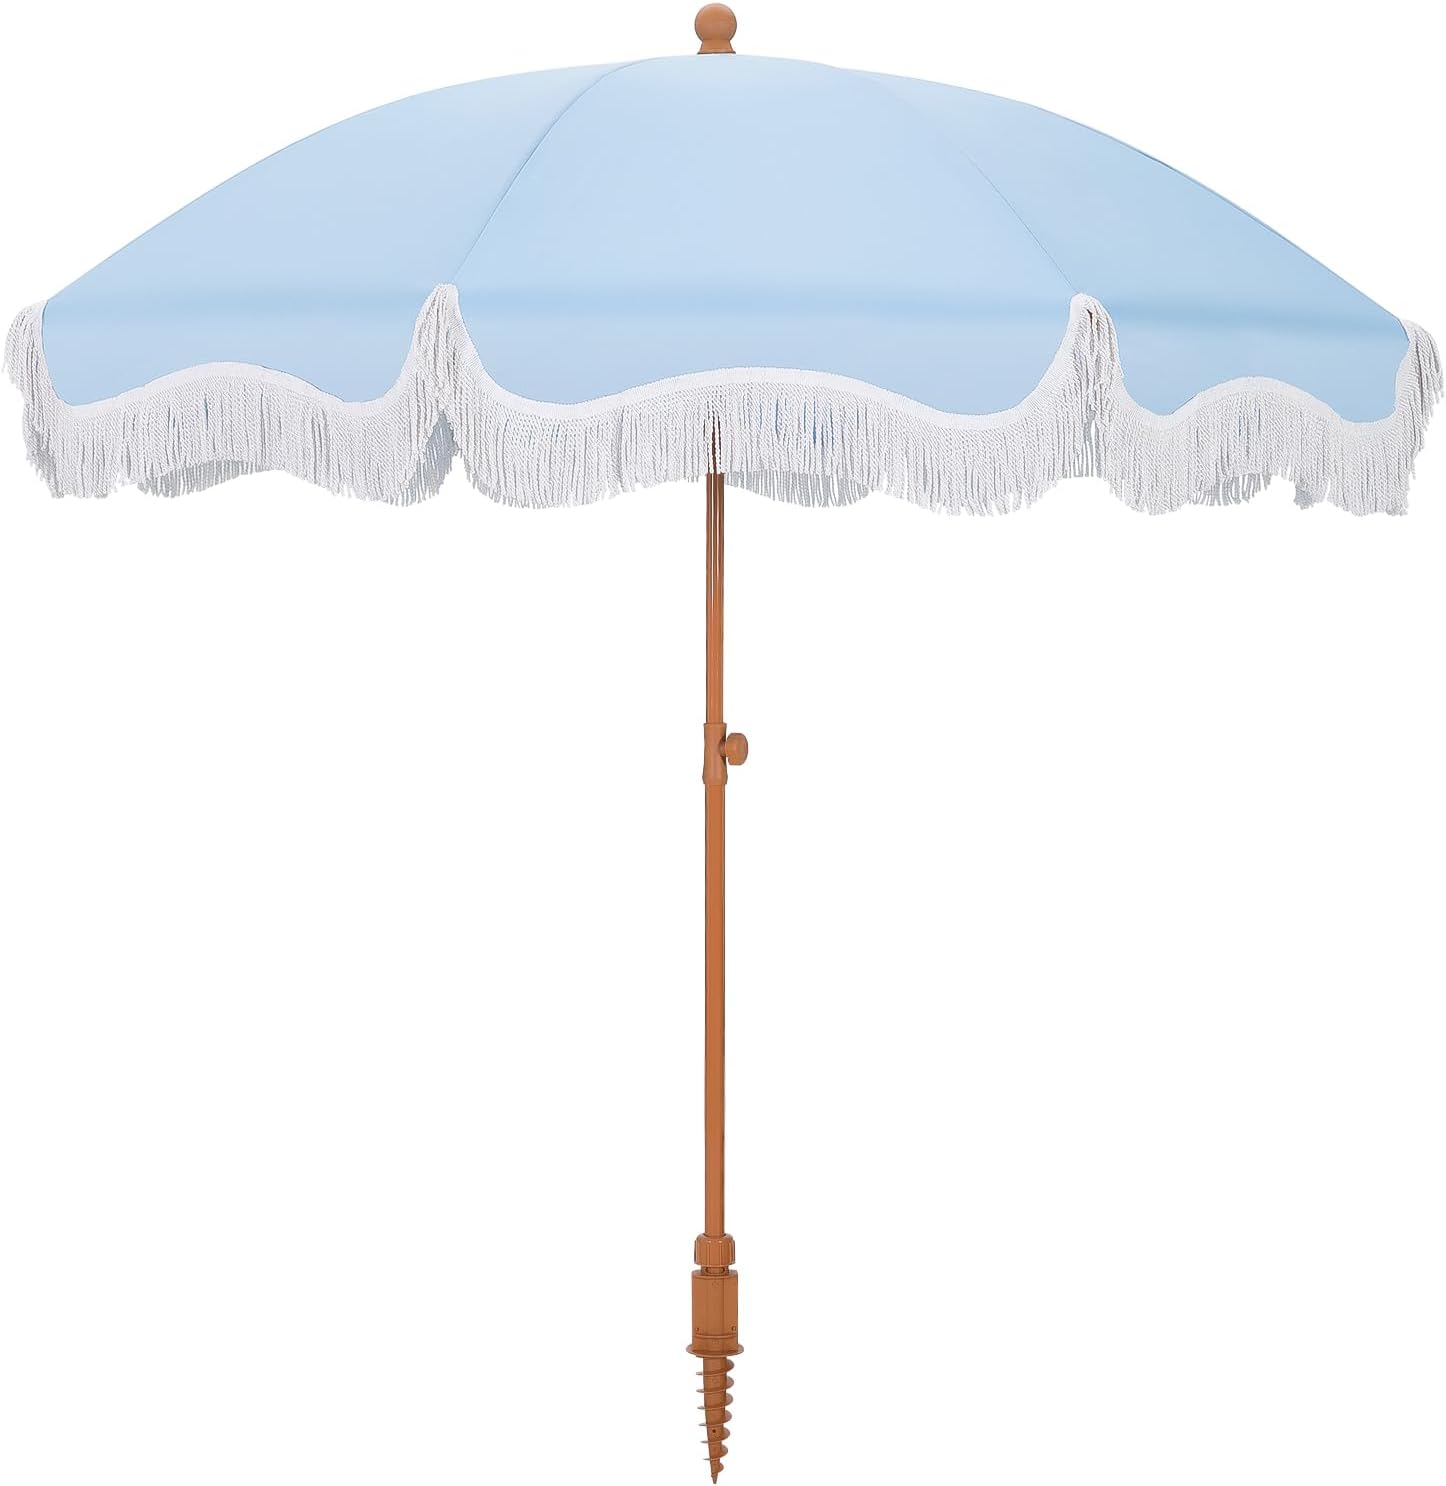 MFSTUDIO 7ft Beach Umbrella with Fringe, Tassel Umbrellas UPF50+ with Tilt Button & Crank, Holiday Outdoor Umbrella with Carry Bag, Ideal for Garden Lawn Poolside